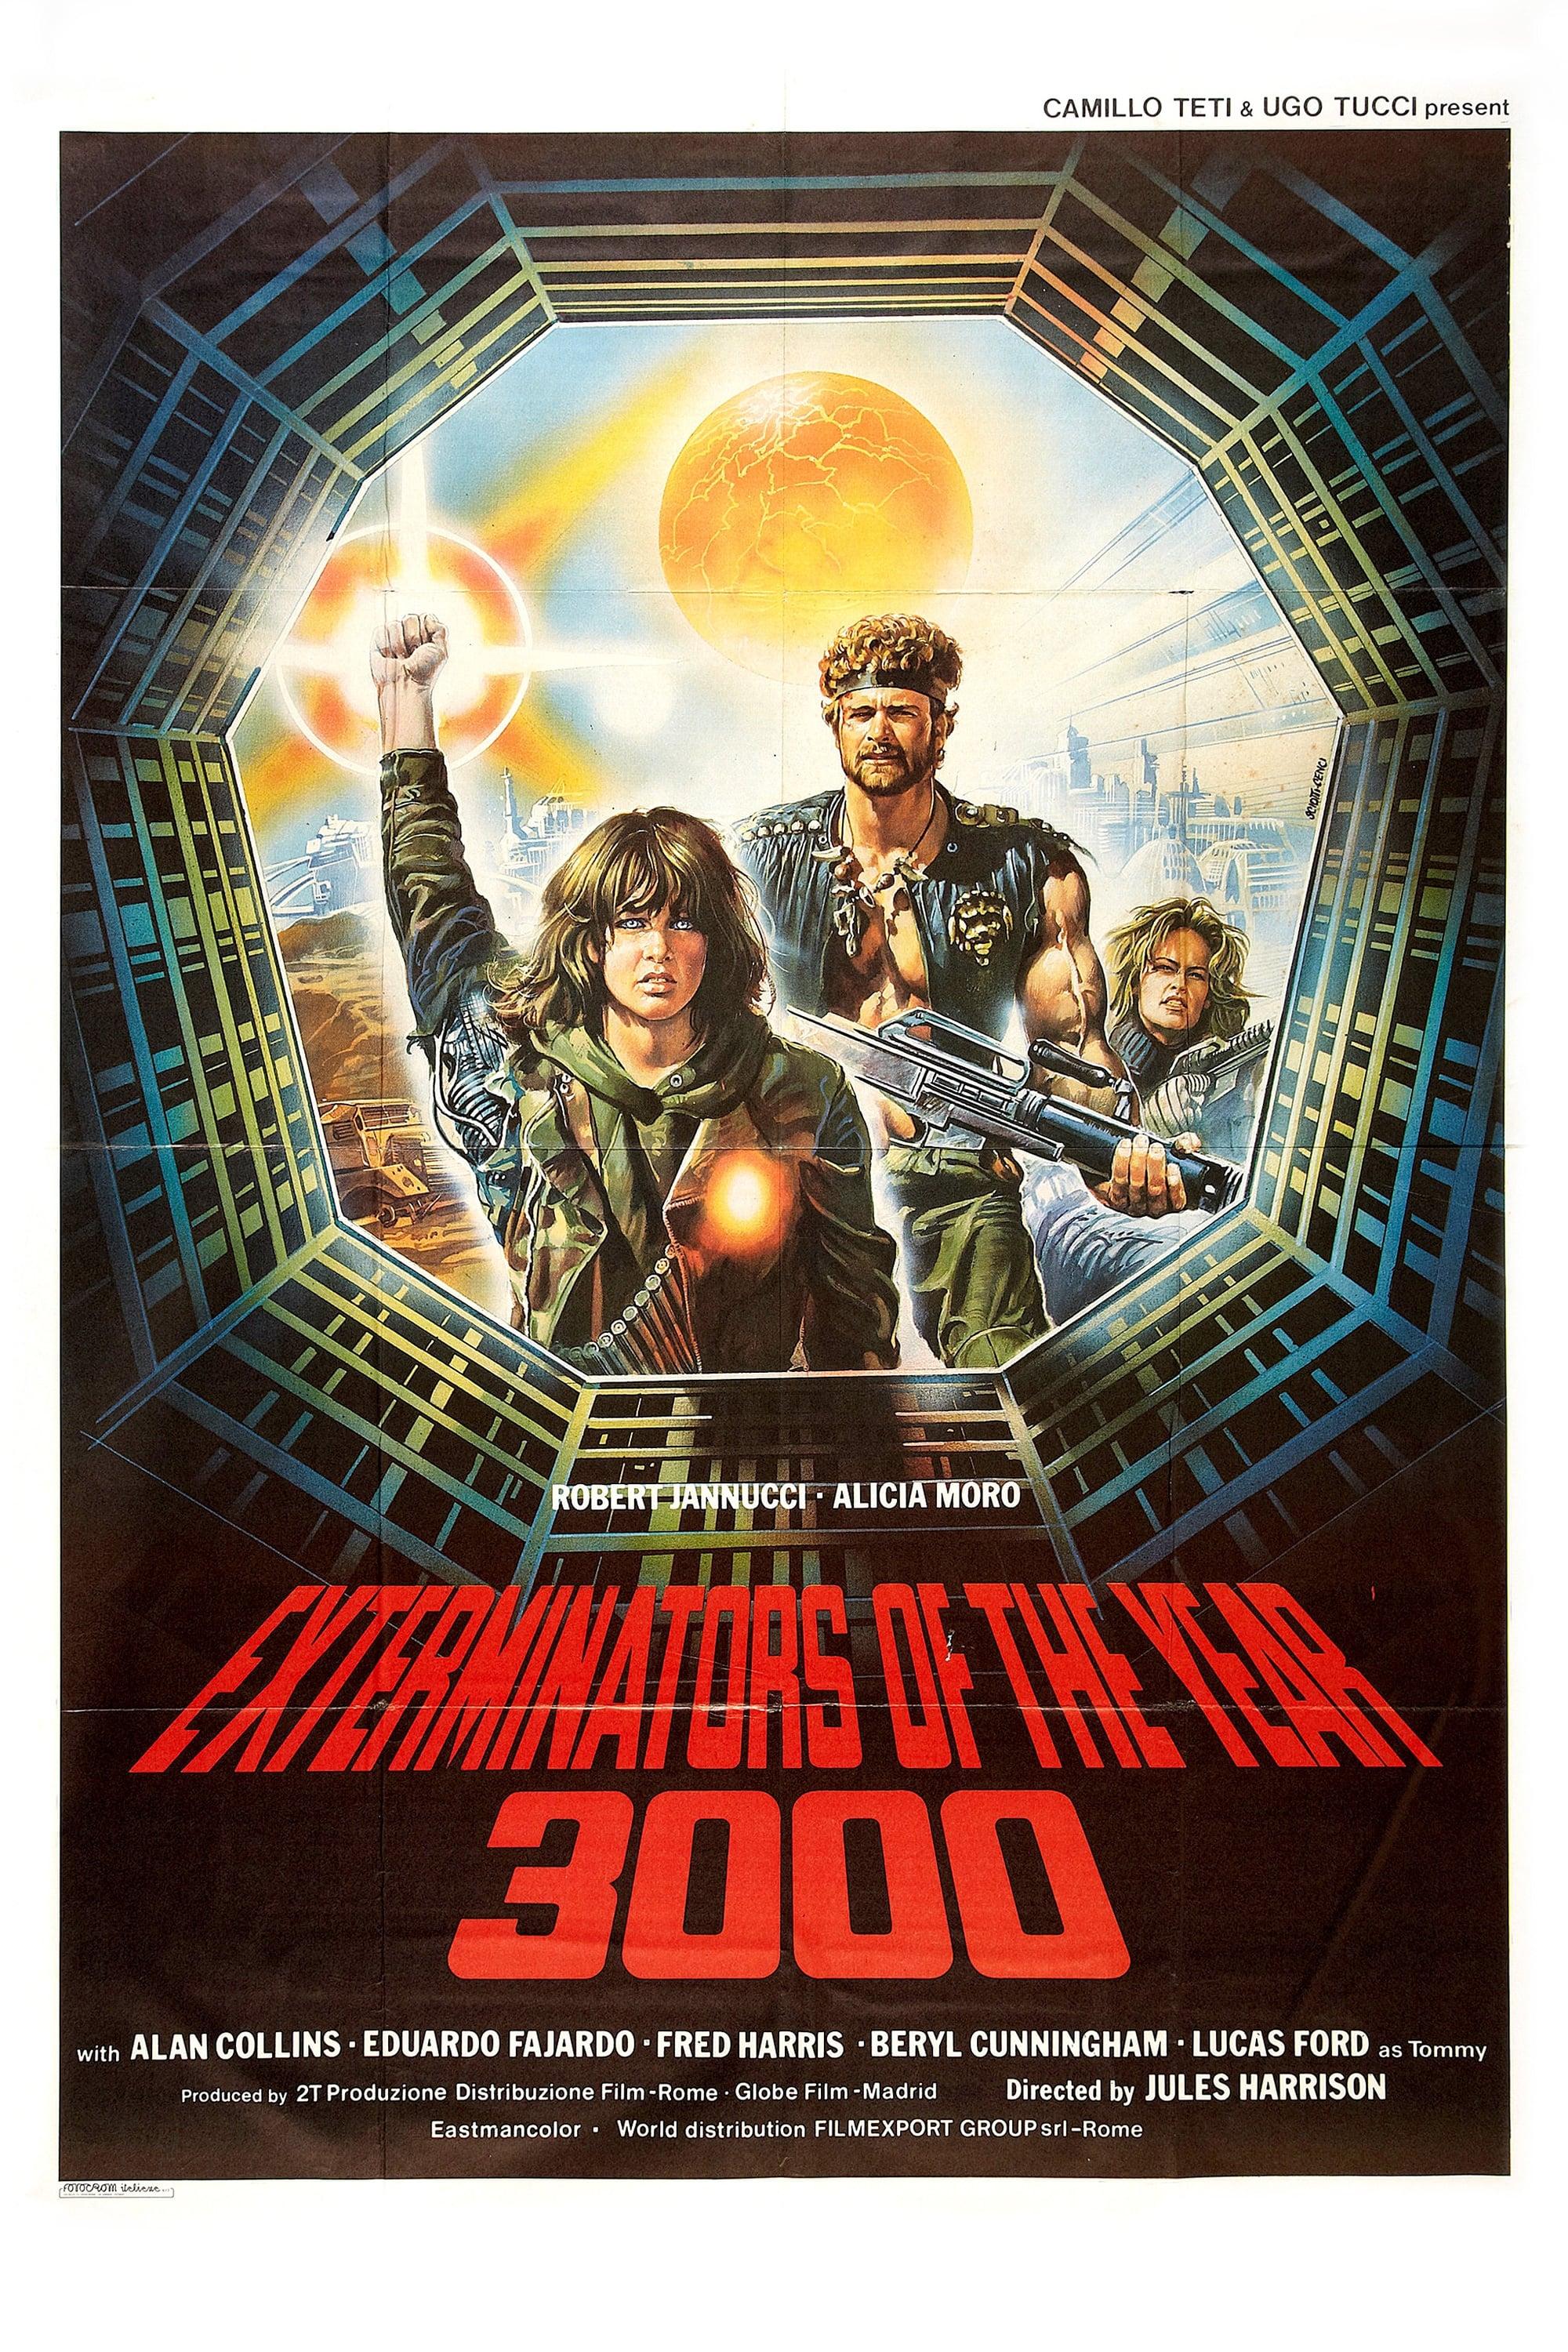 Exterminators of the Year 3000 poster